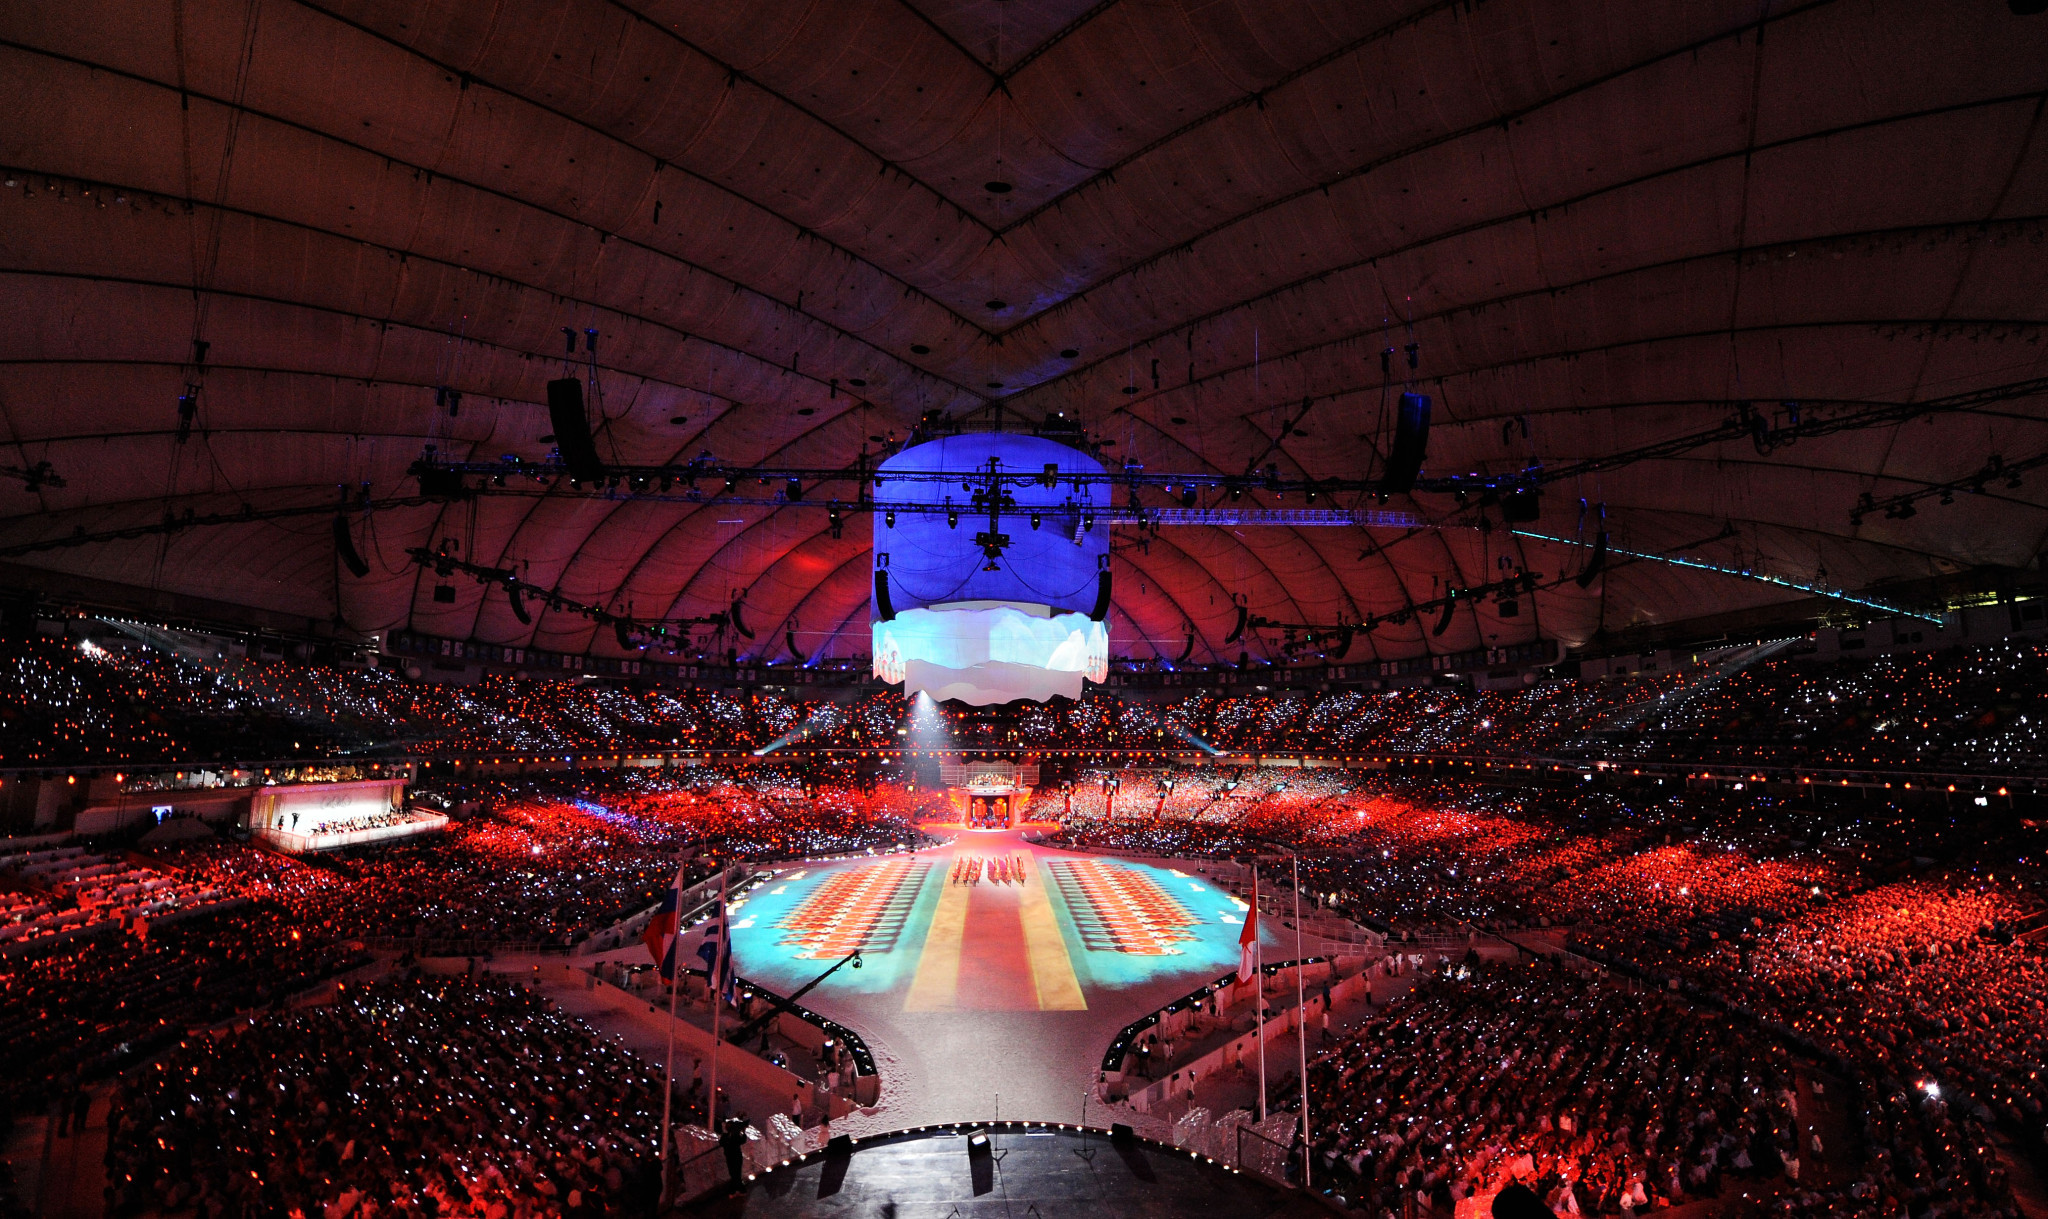 Vancouver staged the Winter Olympics and Paralympics in 2010, while Los Angeles is due to host the Olympics for the third time in 2028 ©Getty Images